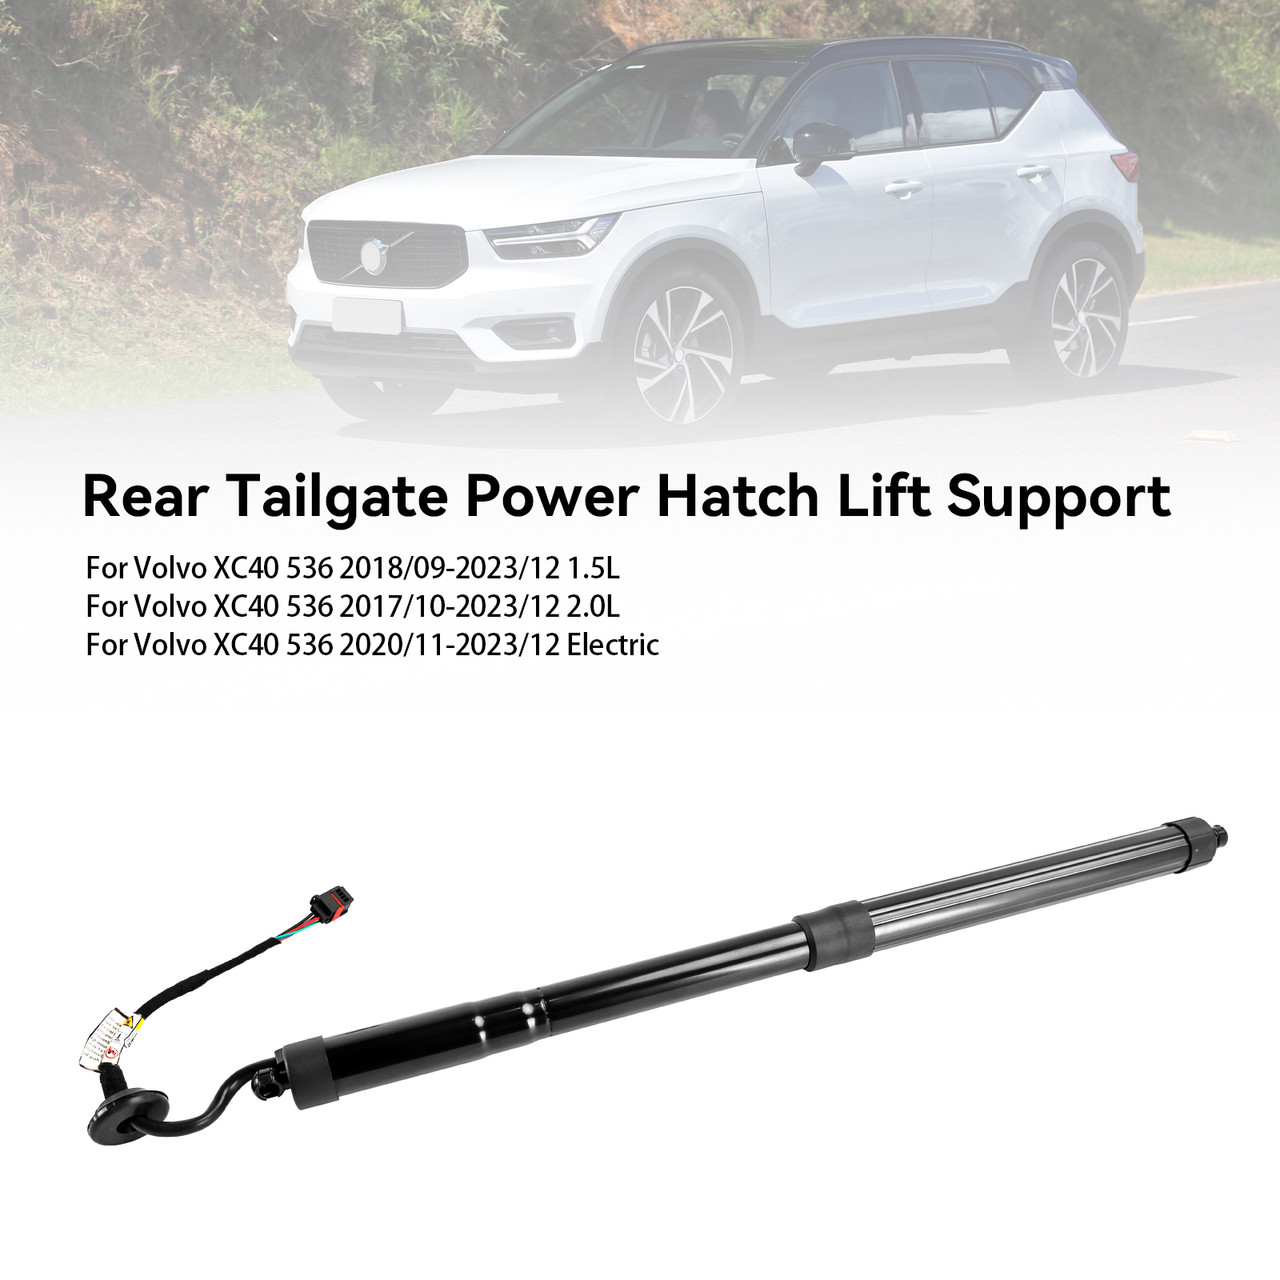 2017/10-2023/12 Volvo XC40 536 2.0L left Rear Tailgate Power Hatch Lift Support 32296296, 32357573, 32384408 black Generic